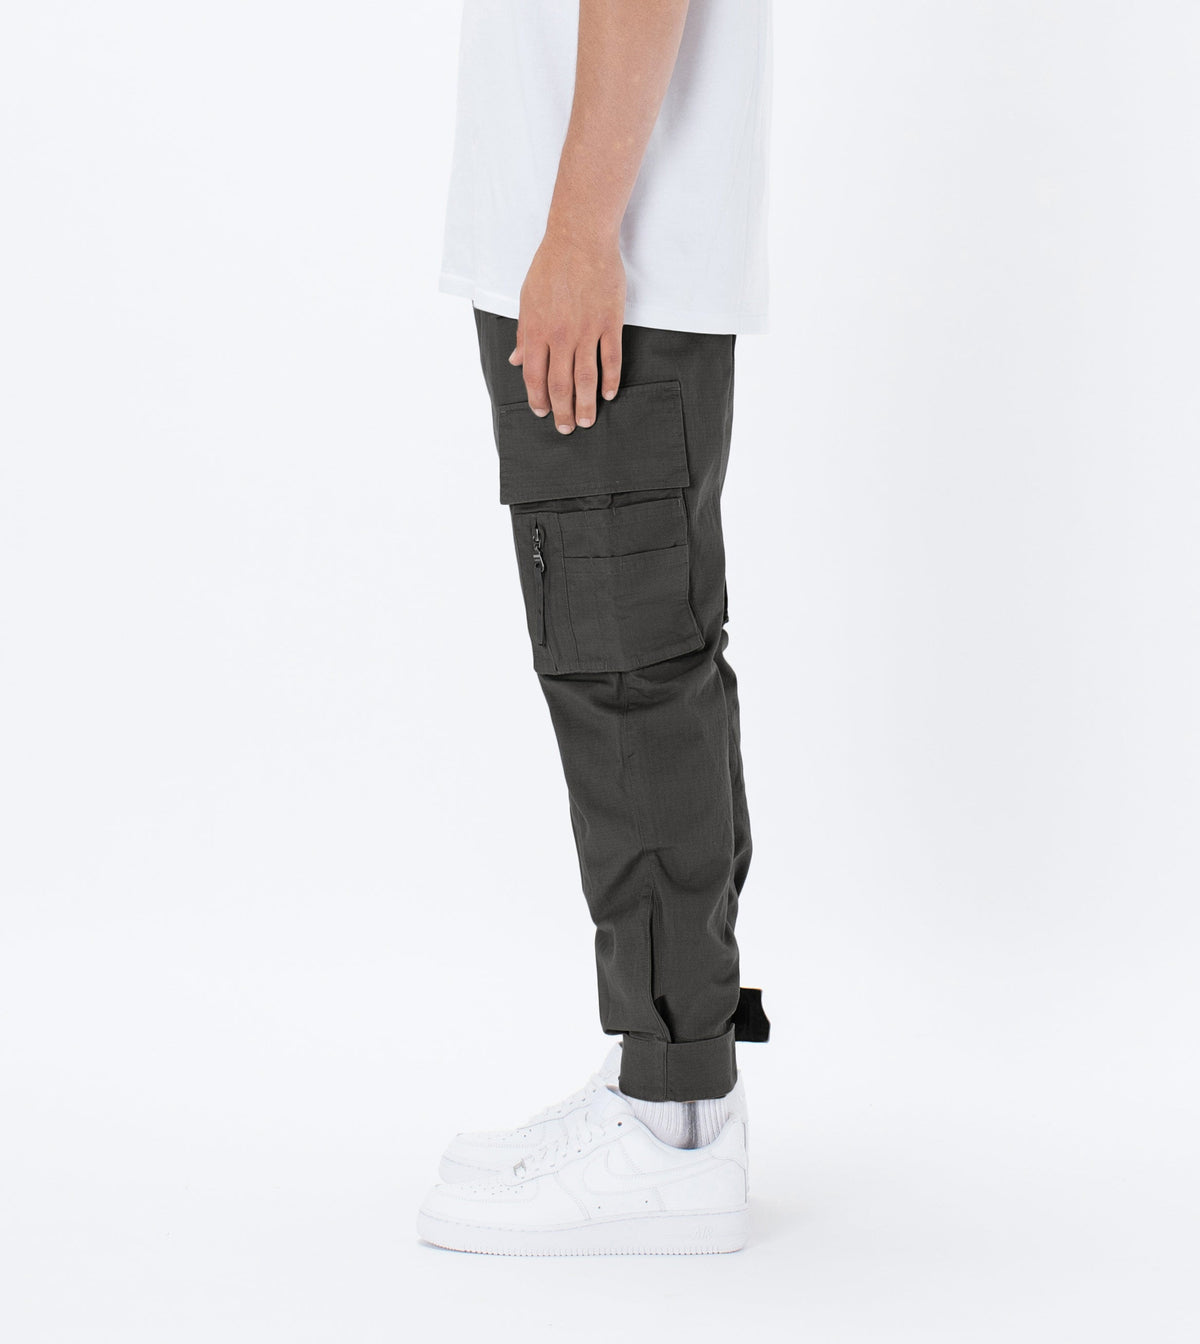 Take a look at our exciting line of Militat Jumpa Pant Ripstop Dk Army  ZANEROBE . Unique Designs You Won't find anywhere else